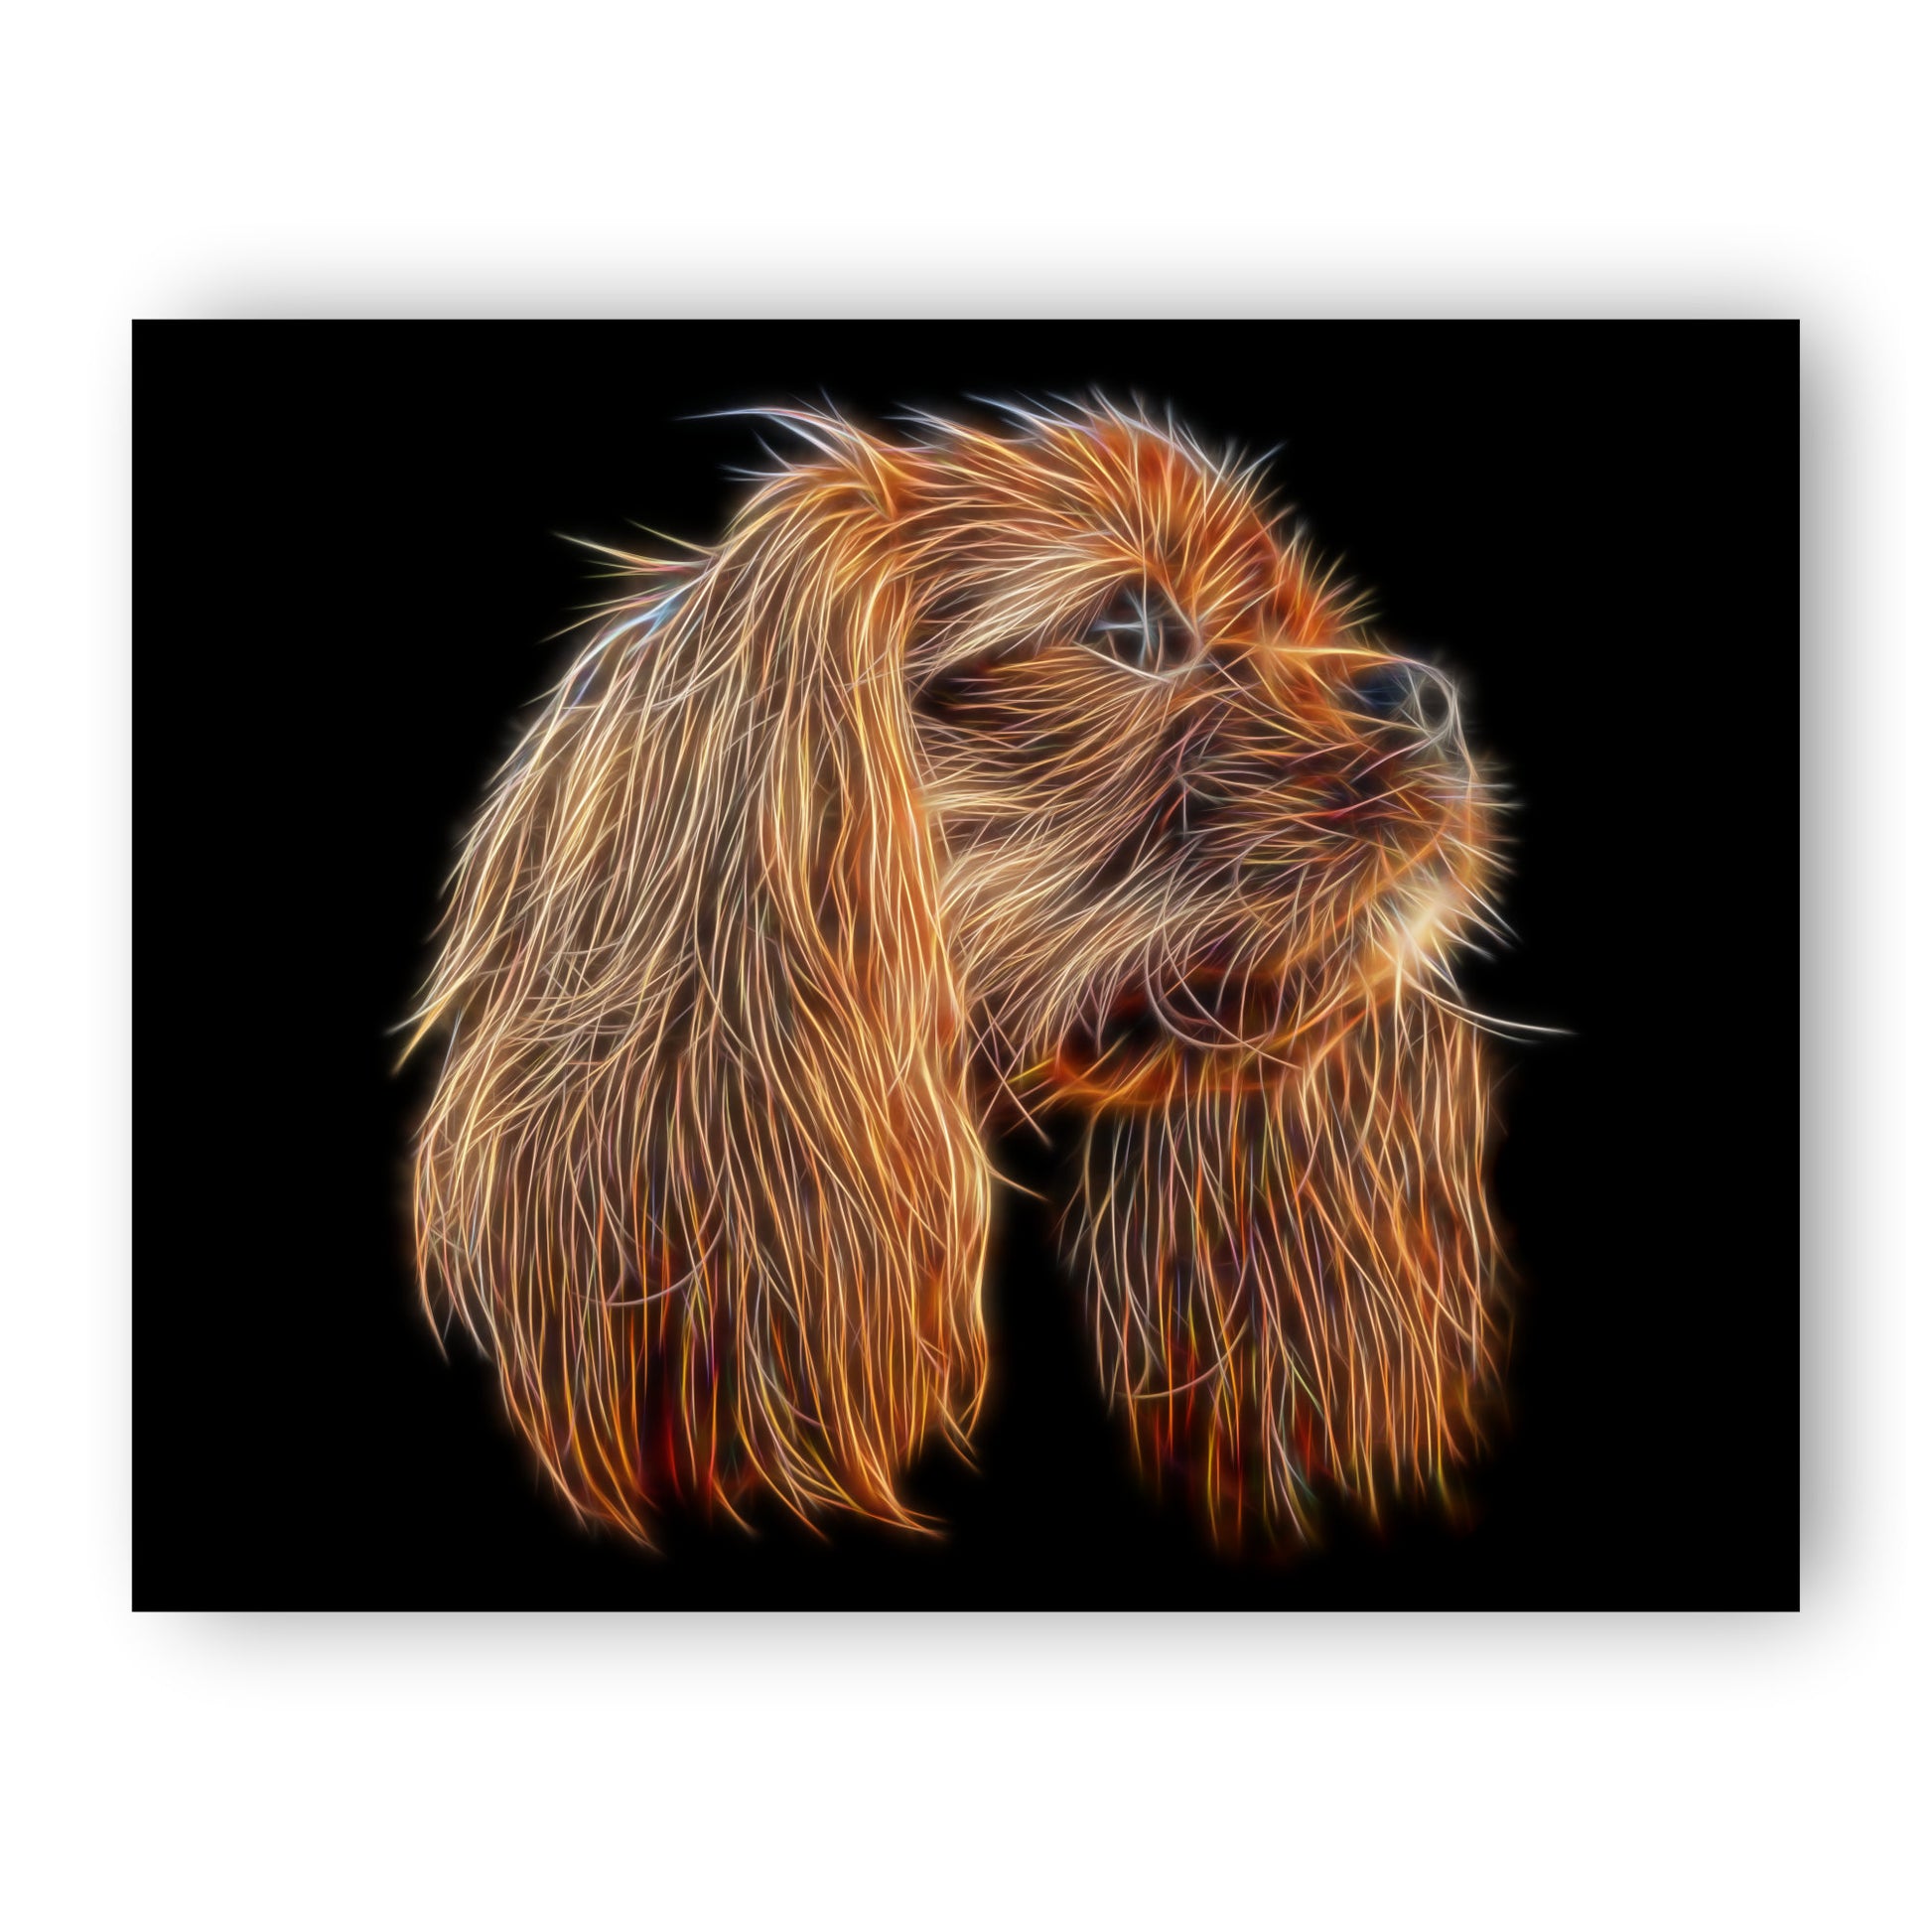 Ruby King Charles Spaniel Print with Stunning Fractal Art Design. Various Sizes Available